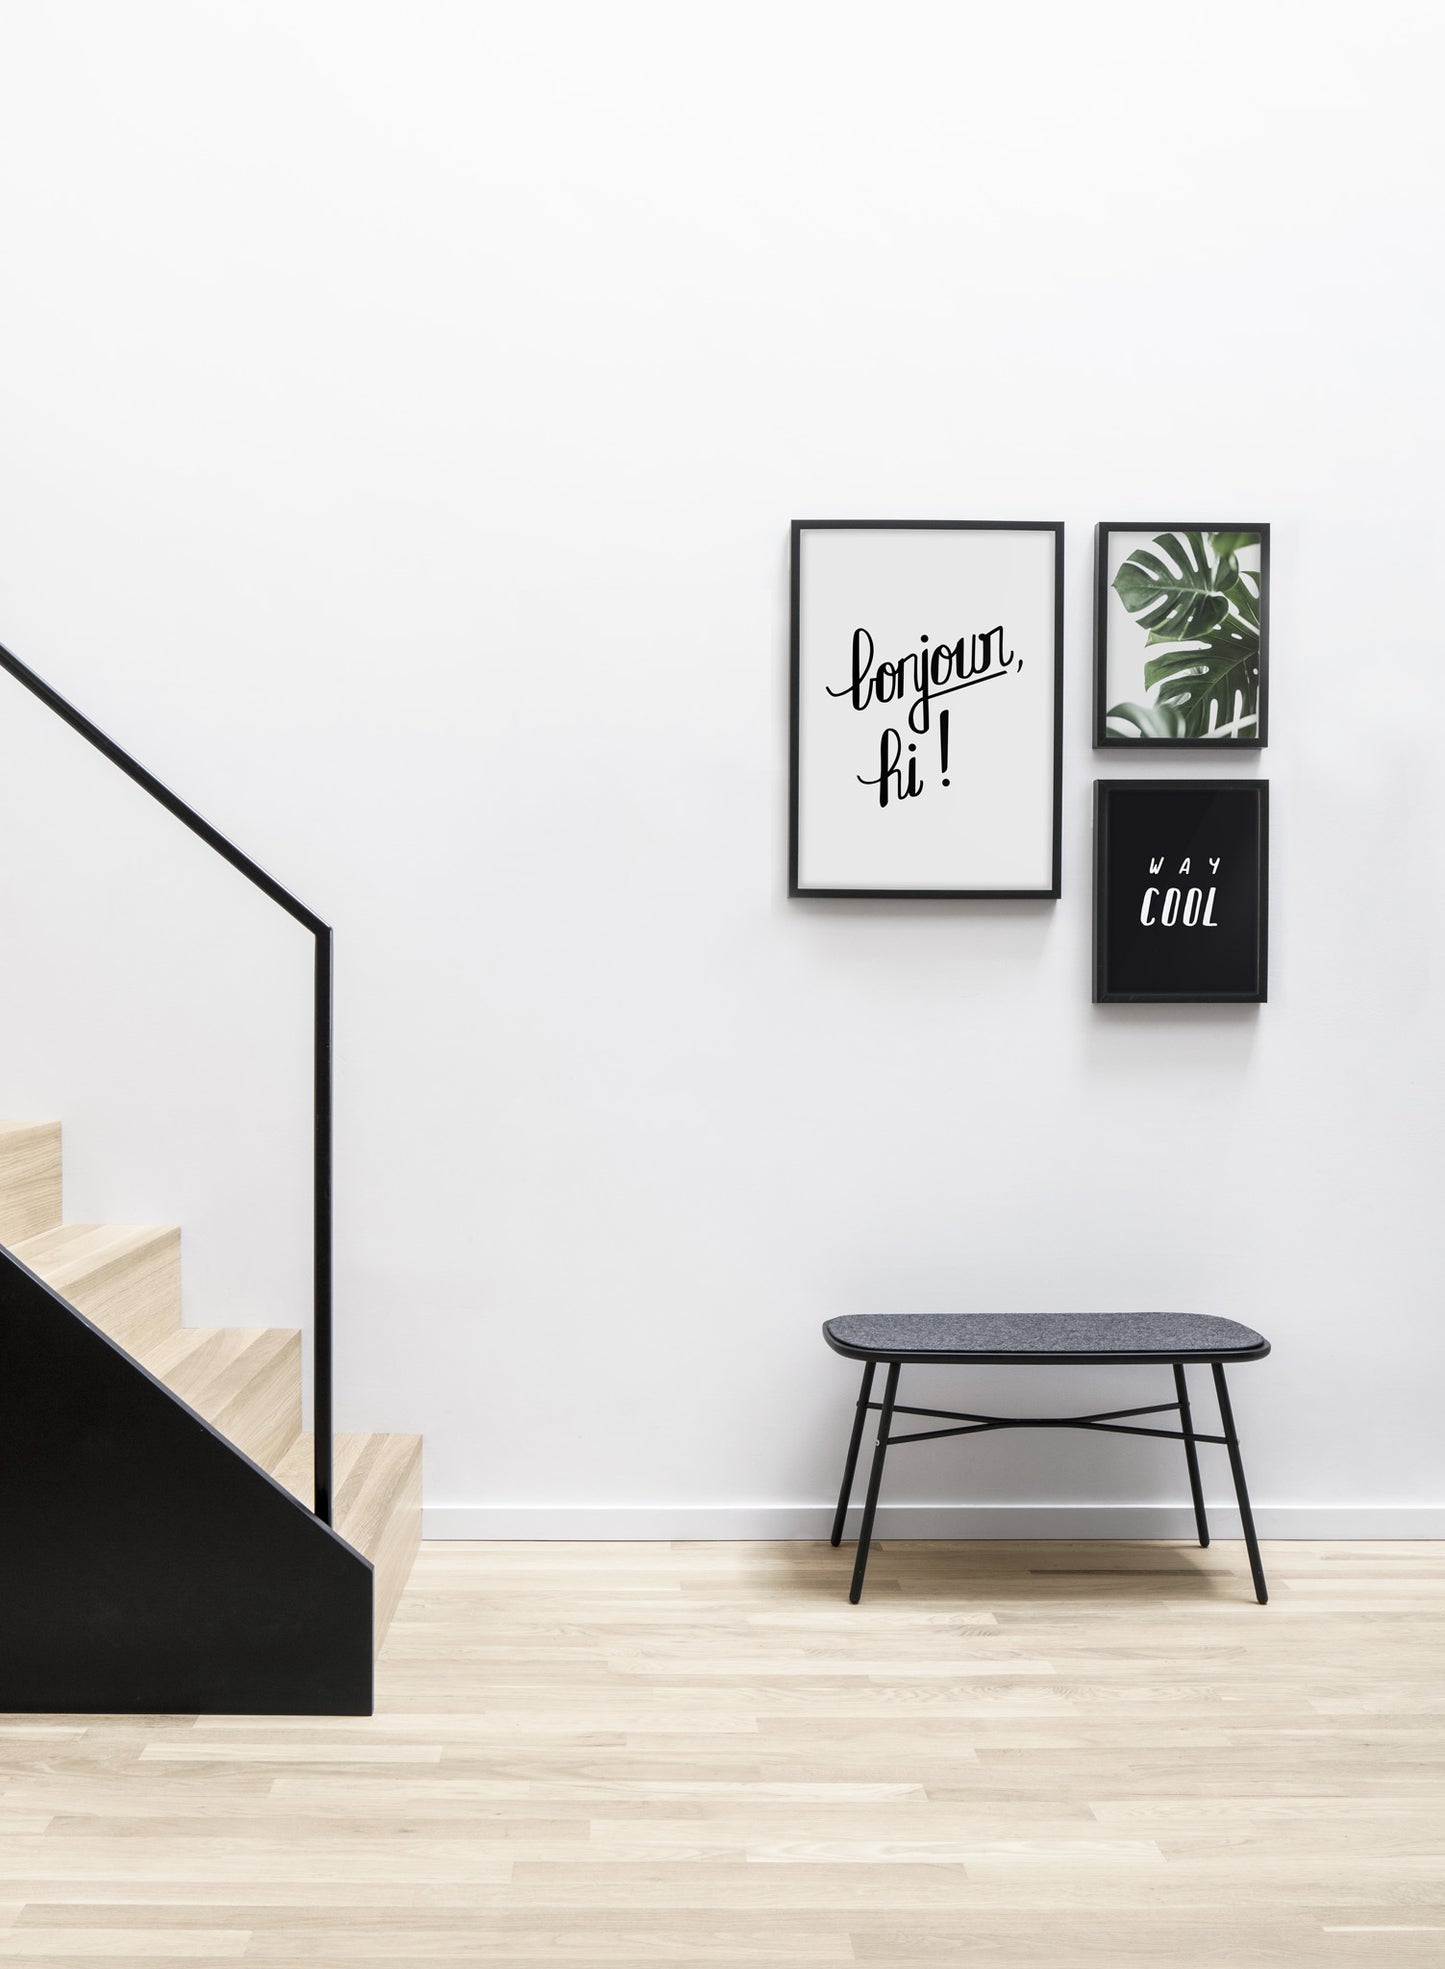 Minimalist art print by Opposite Wall with Bonjour hand-drawn design - Living room with a design staircase